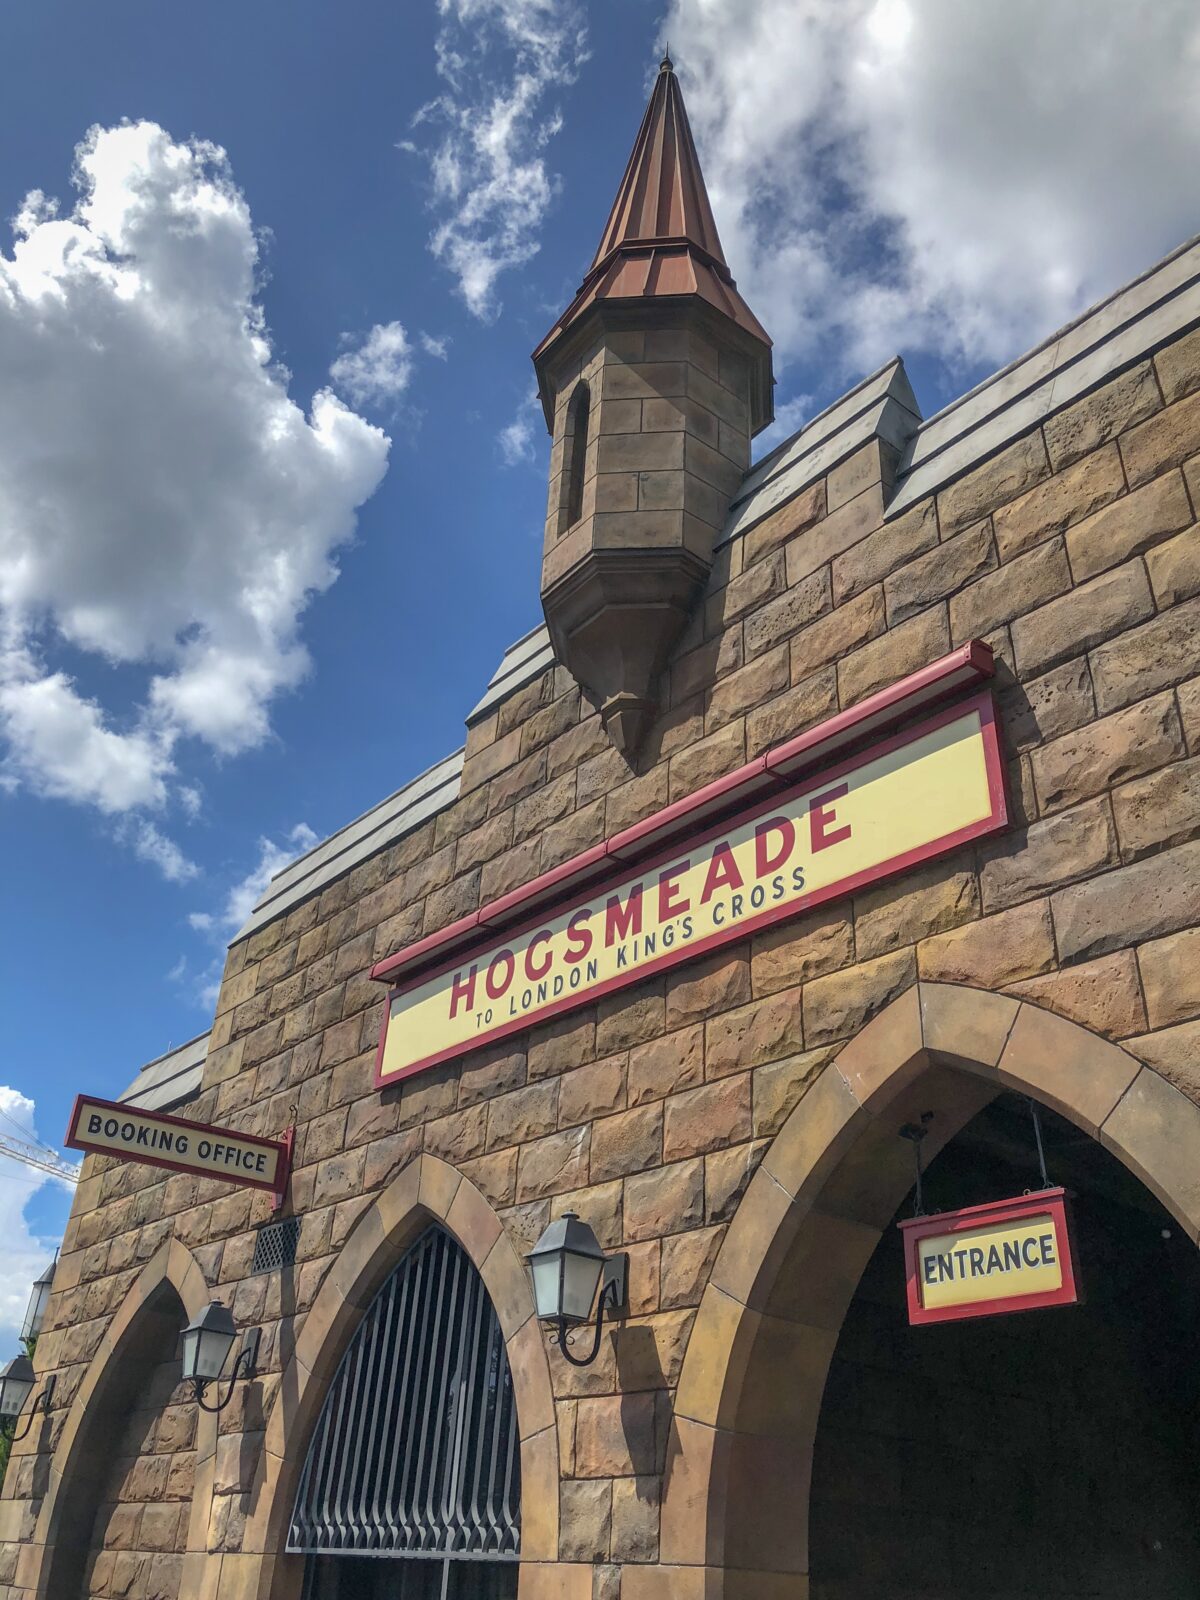 The Wizarding World of Harry Potter Hogsmeade Station